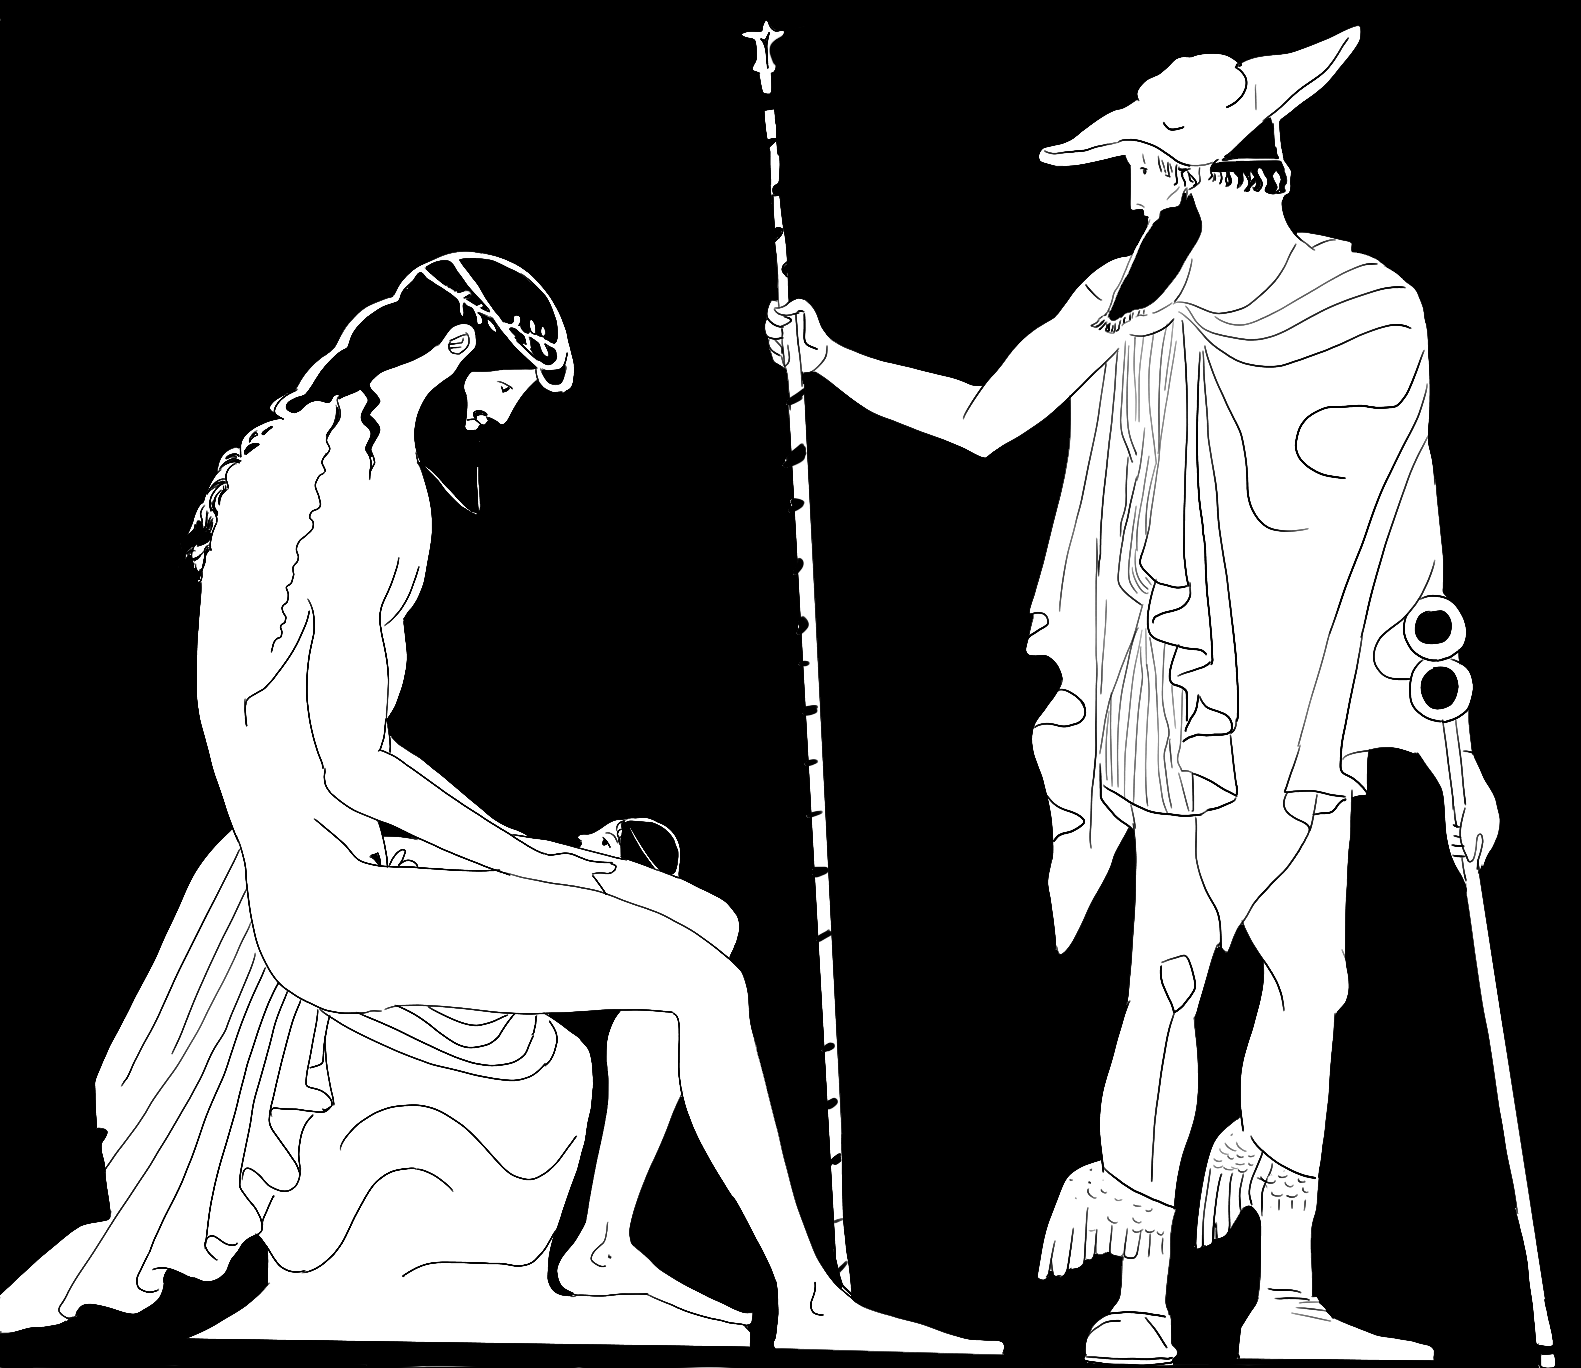 Zeus, nude, sits with the head of child Dionysus emerging from his thig. Hermes stands by, holding a sceptre and caduceus, and wearing chlamys, petasos, and winged boots.